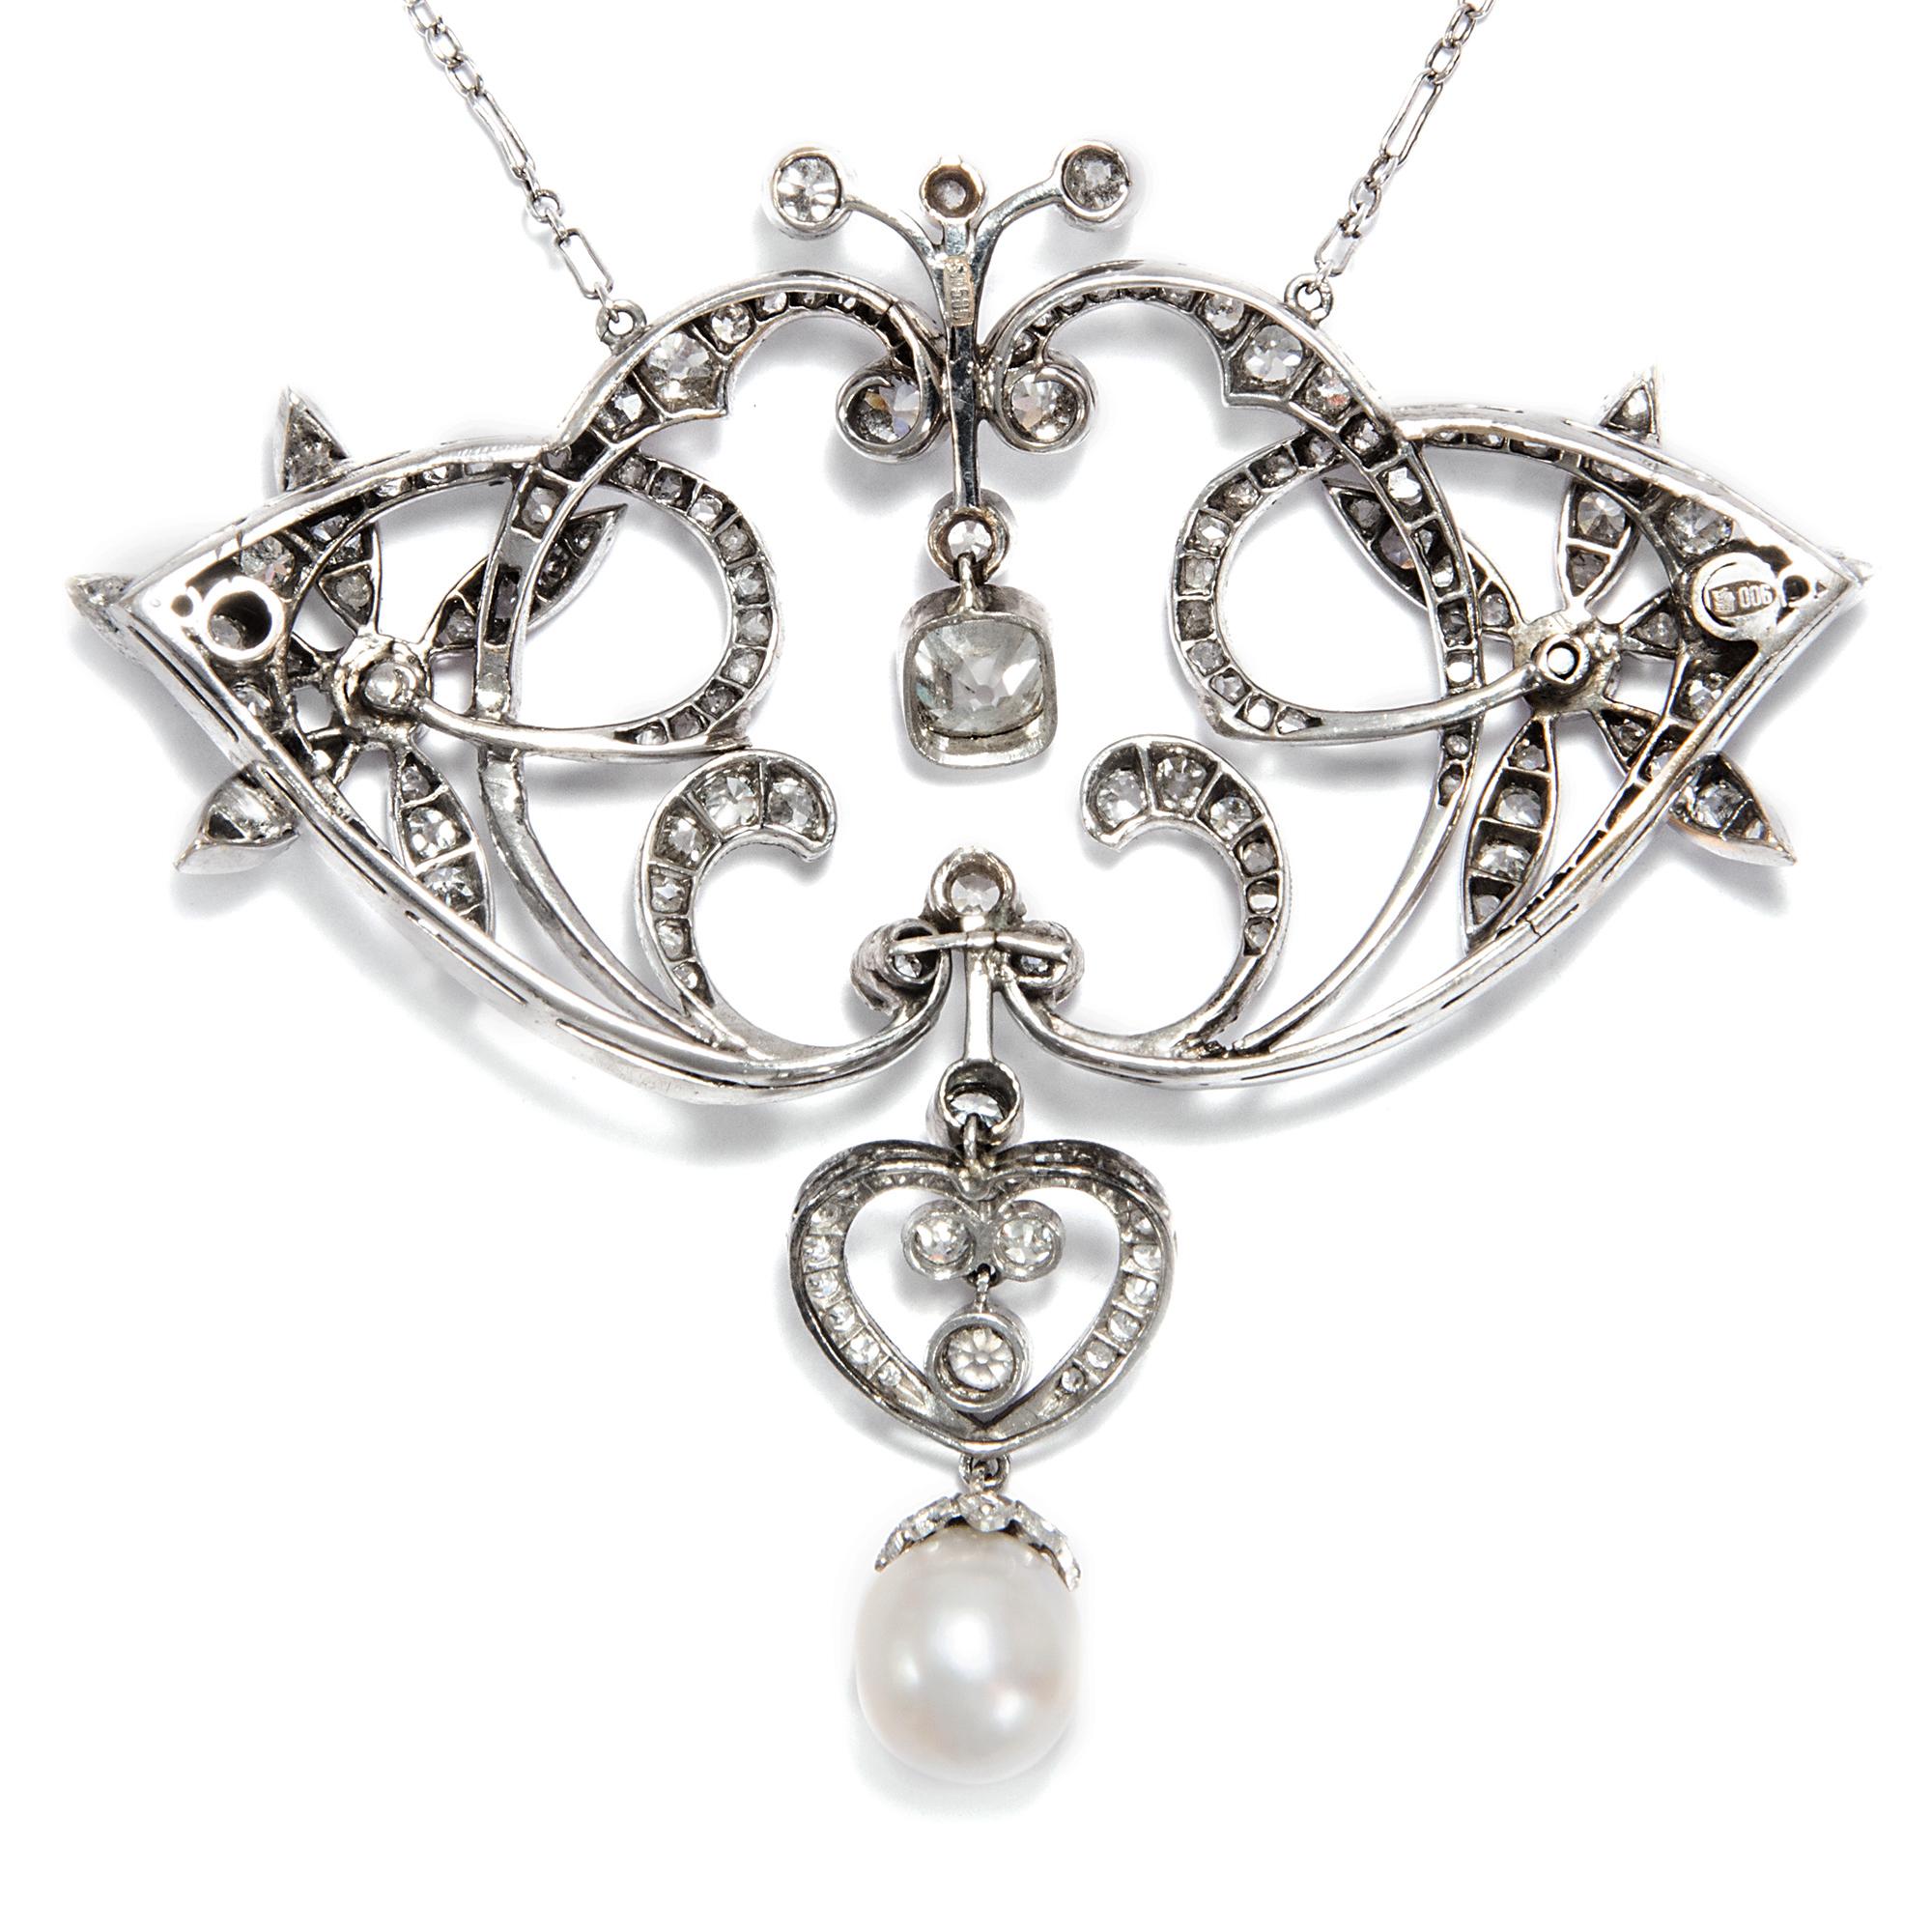 Art Nouveau circa 1905, 5.7 Carat Diamond and Pearl Edwardian Pendant Necklace In Excellent Condition For Sale In Berlin, Berlin